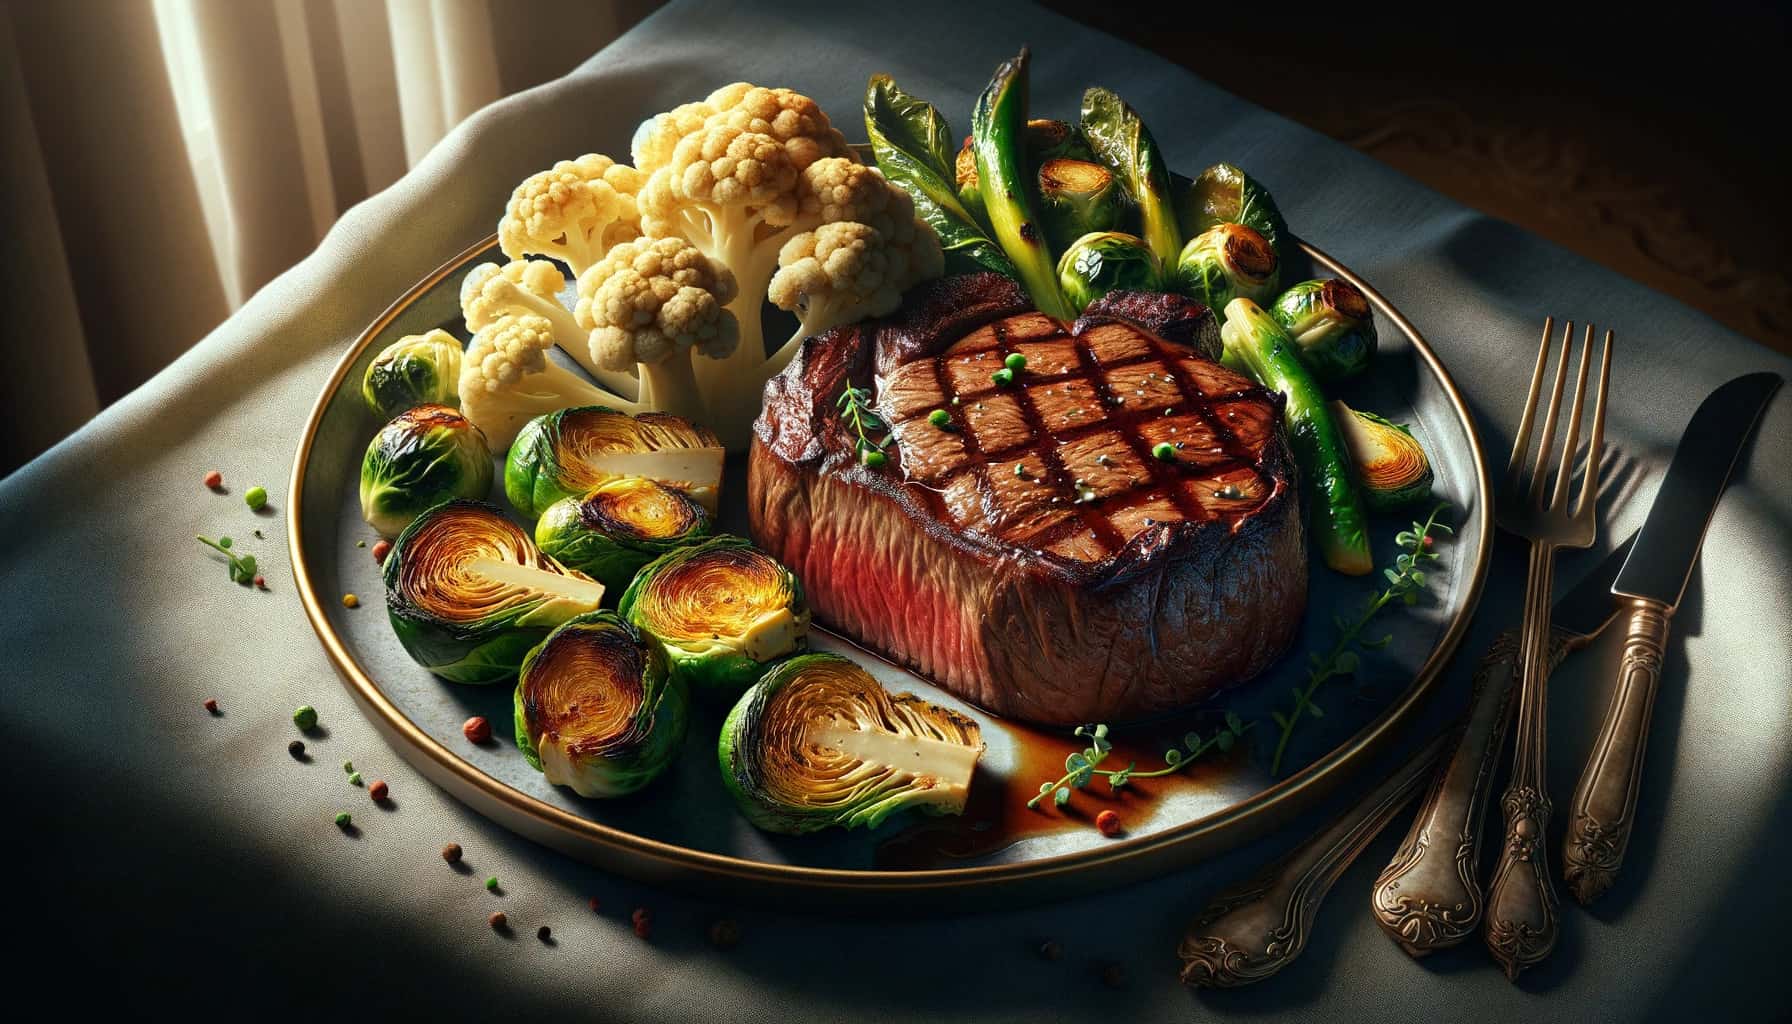 A juicy steak paired with roasted vegetables like cauliflower and brussels sprouts